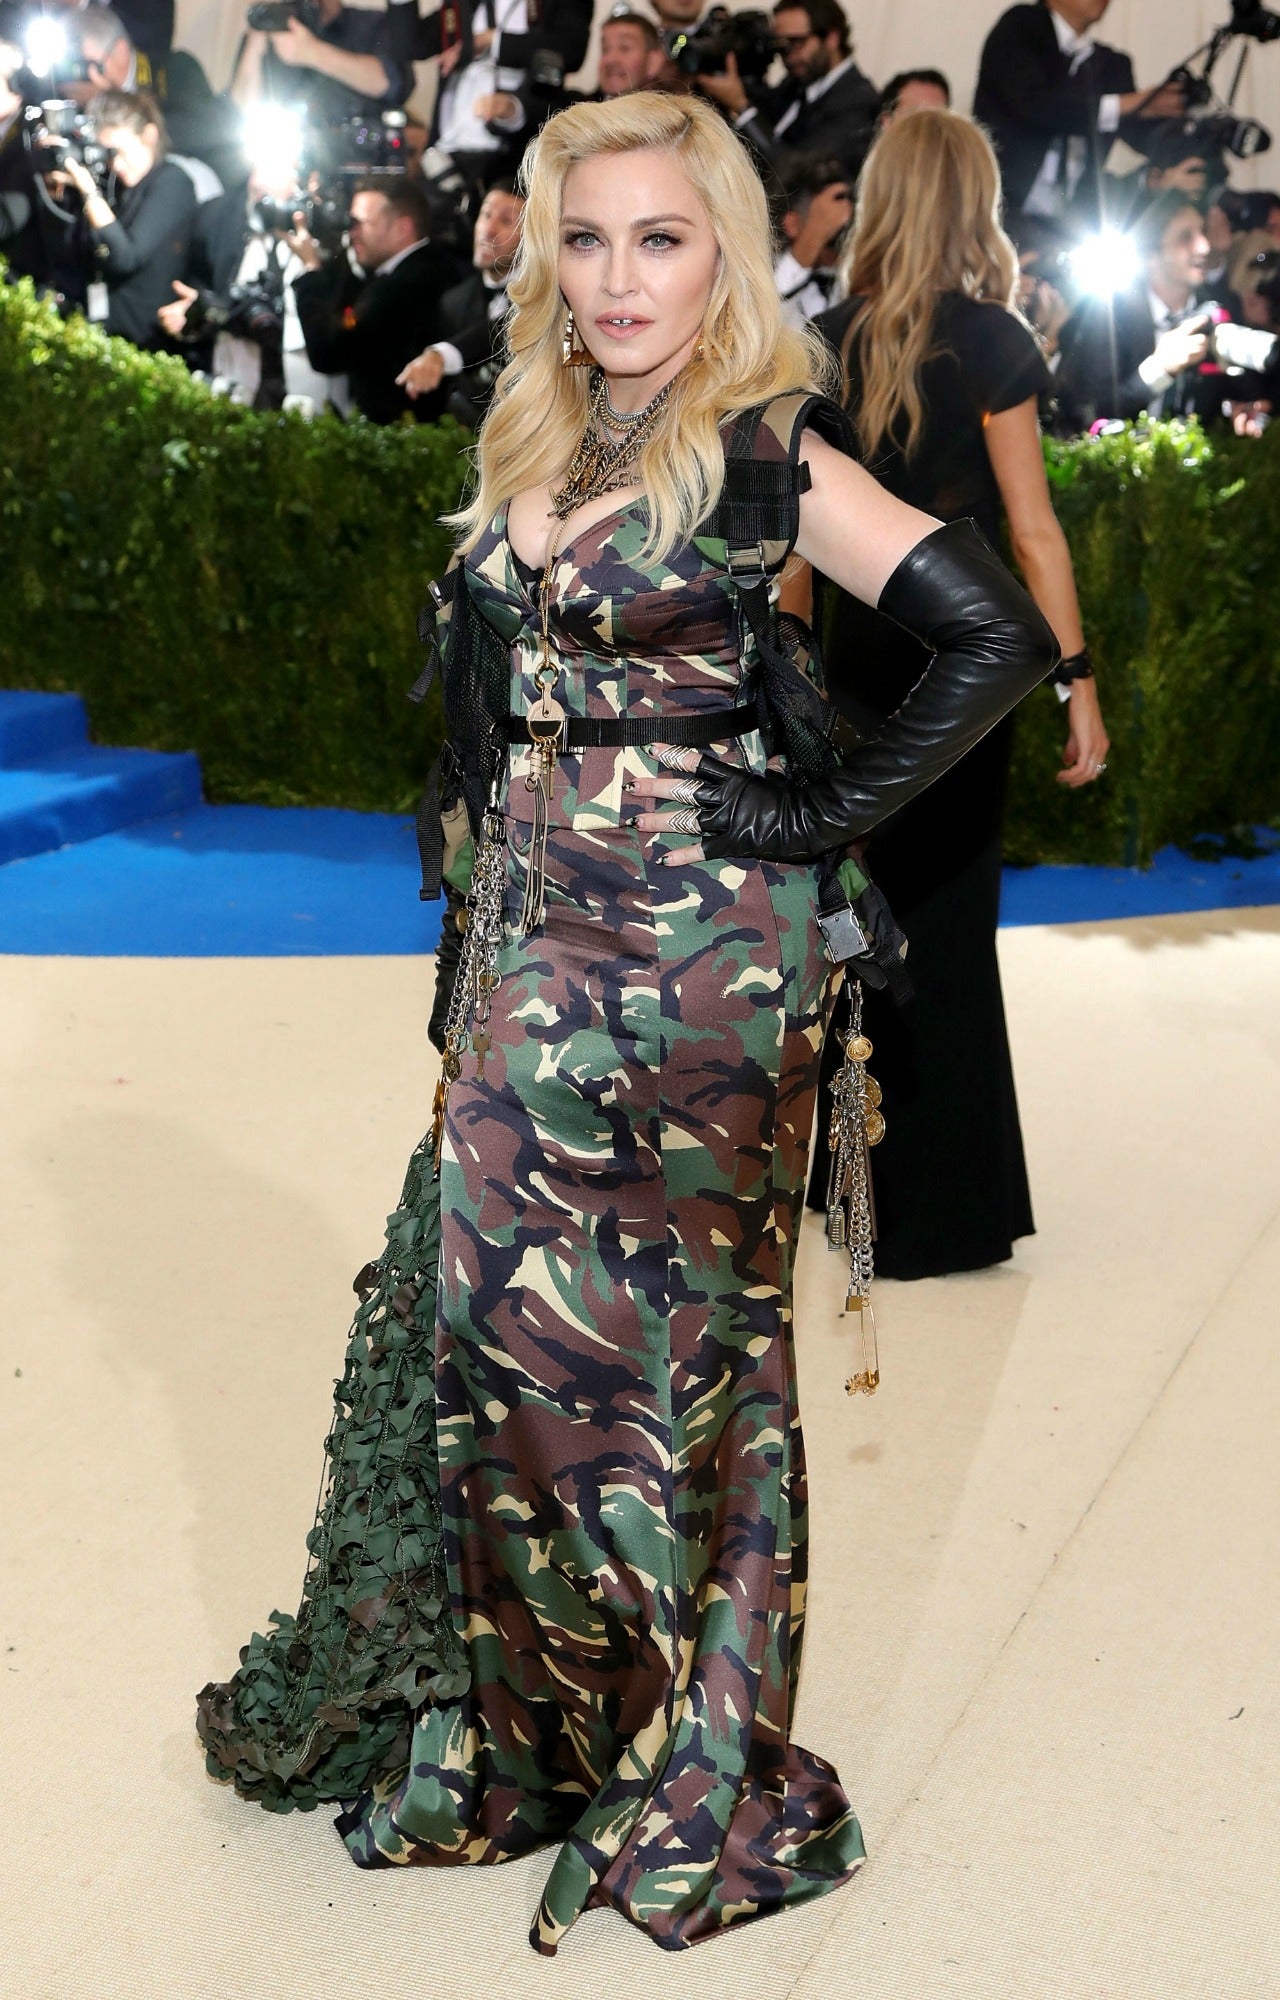 EXCLUSIVE: Madonna Explains Her Crazy Met Gala Army Dress, Reveals She Has Rose in Her ...